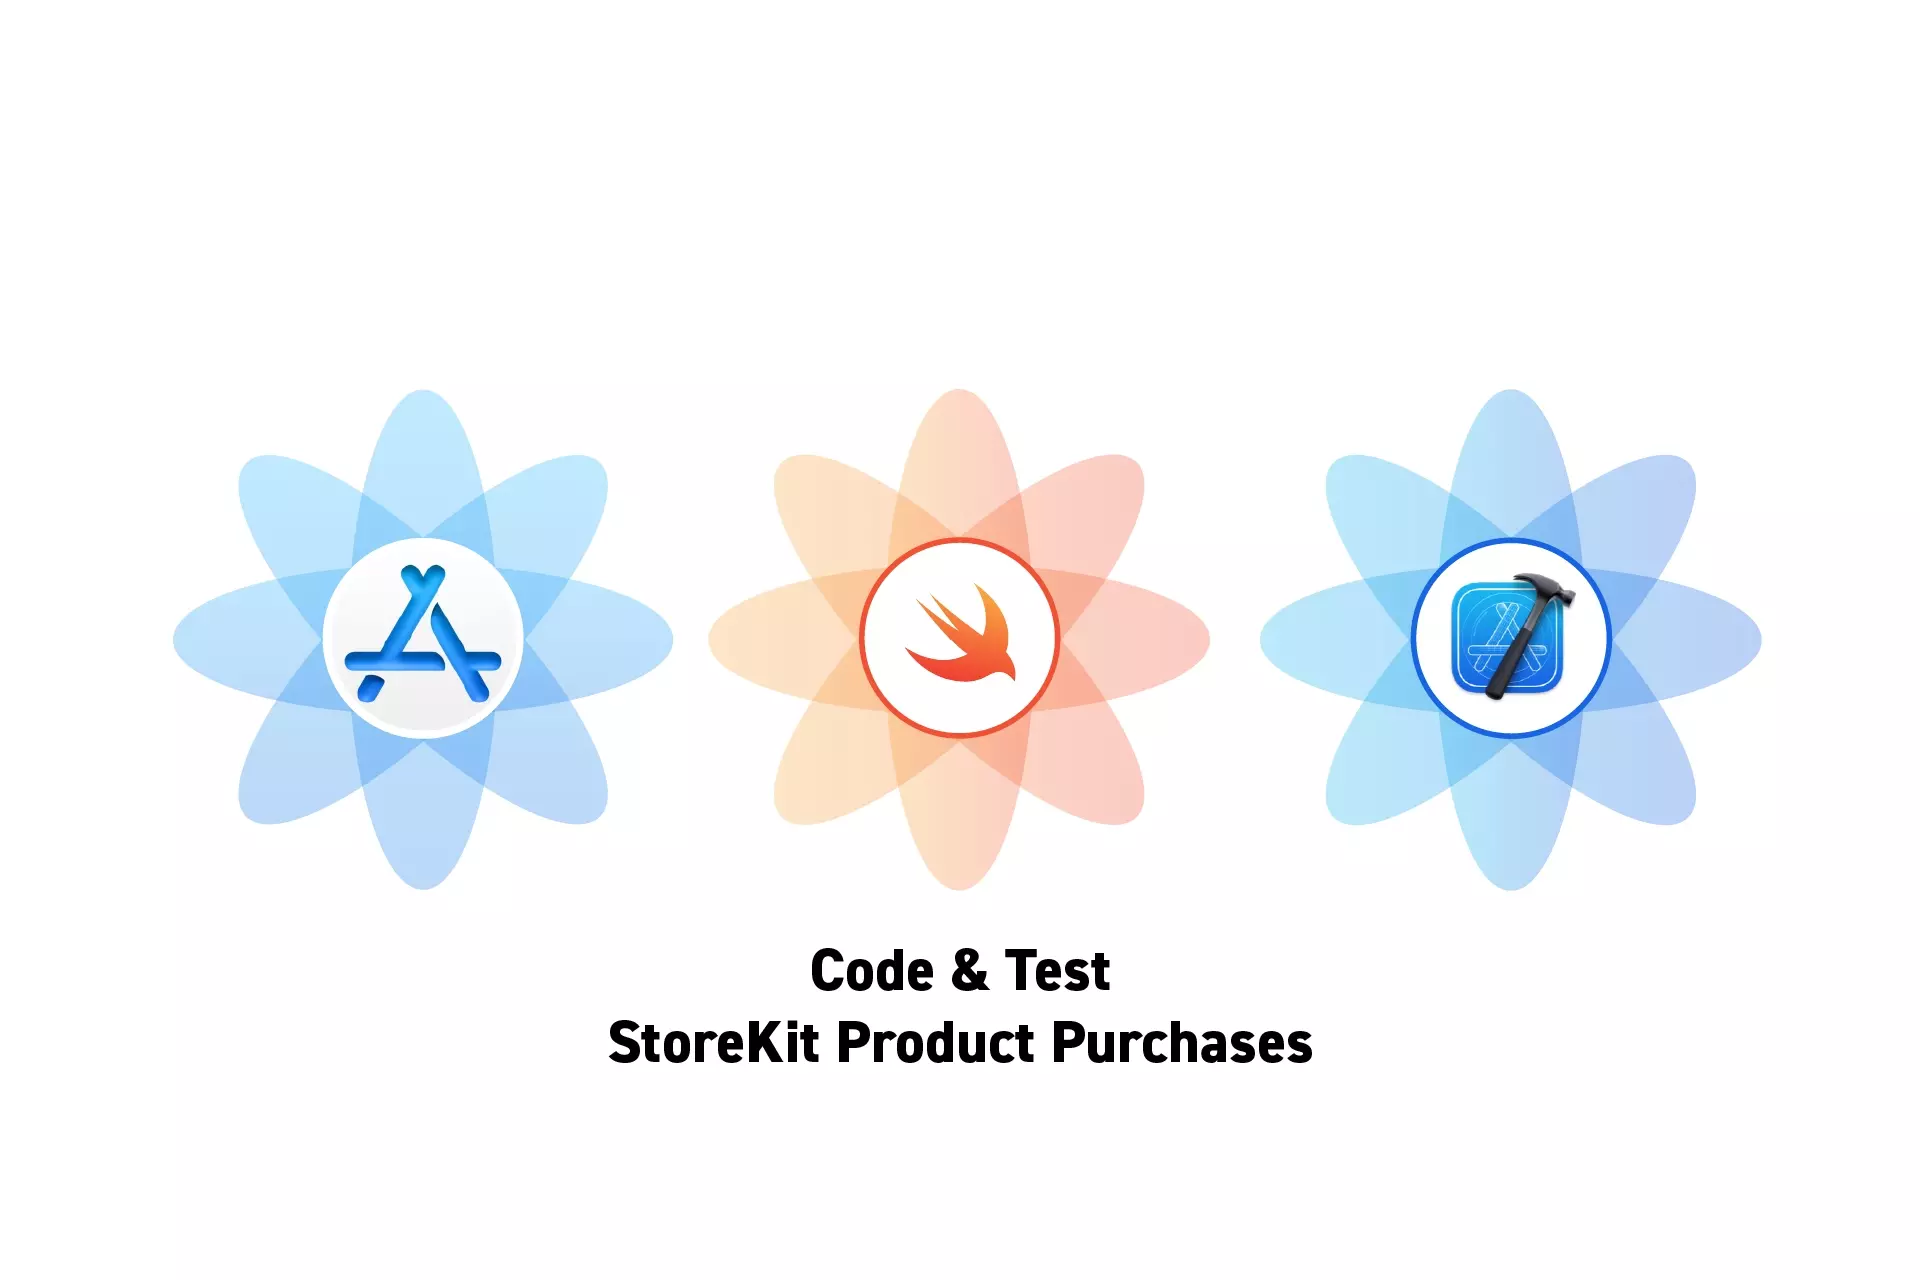 Three flowers that represent StoreKit, Swift and XCode side by side. Beneath them sits the text “Code & Test StoreKit Product Purchases.”